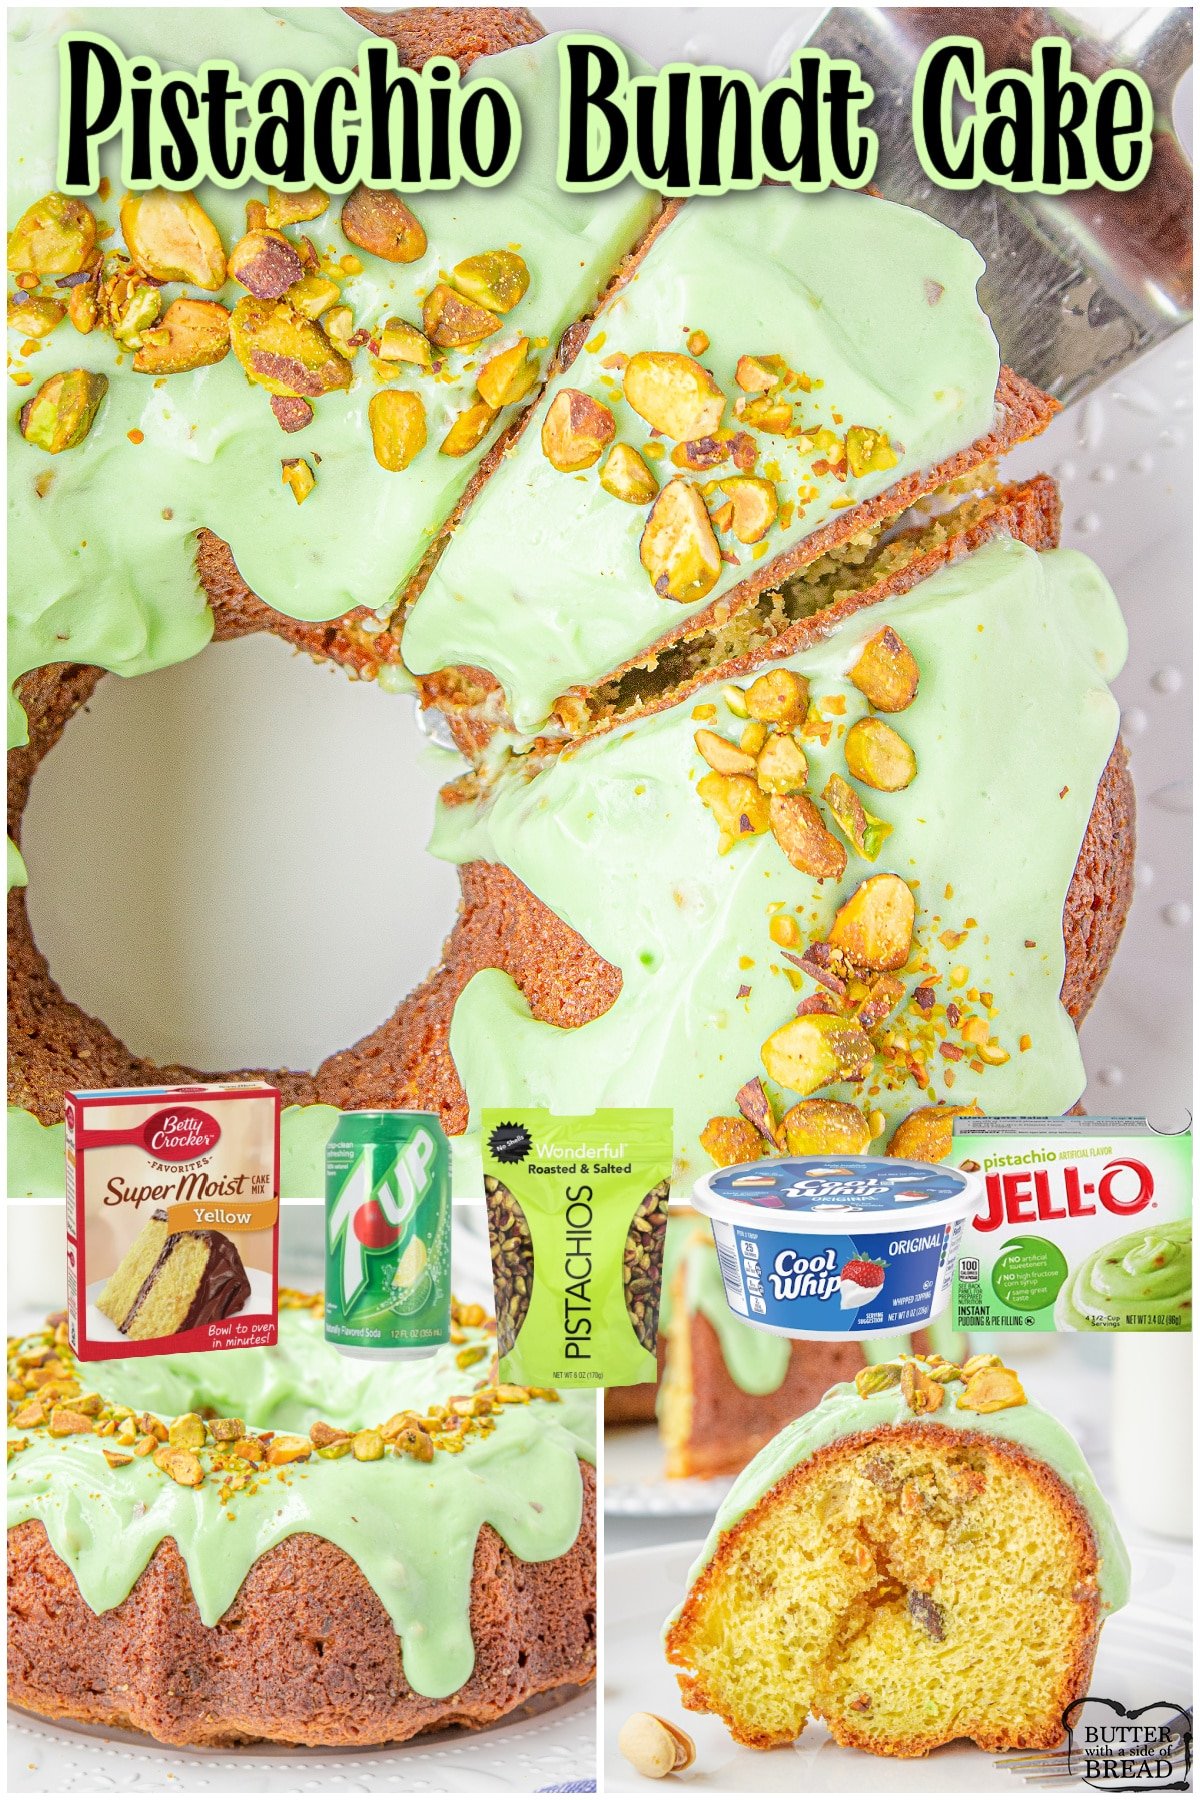 Pistachio Bundt Cake made with a cake mix, pudding mix, lemon lime soda & pistachios! This pistachio cake with frosting has a green tint is especially festive around St. Patrick's Day!